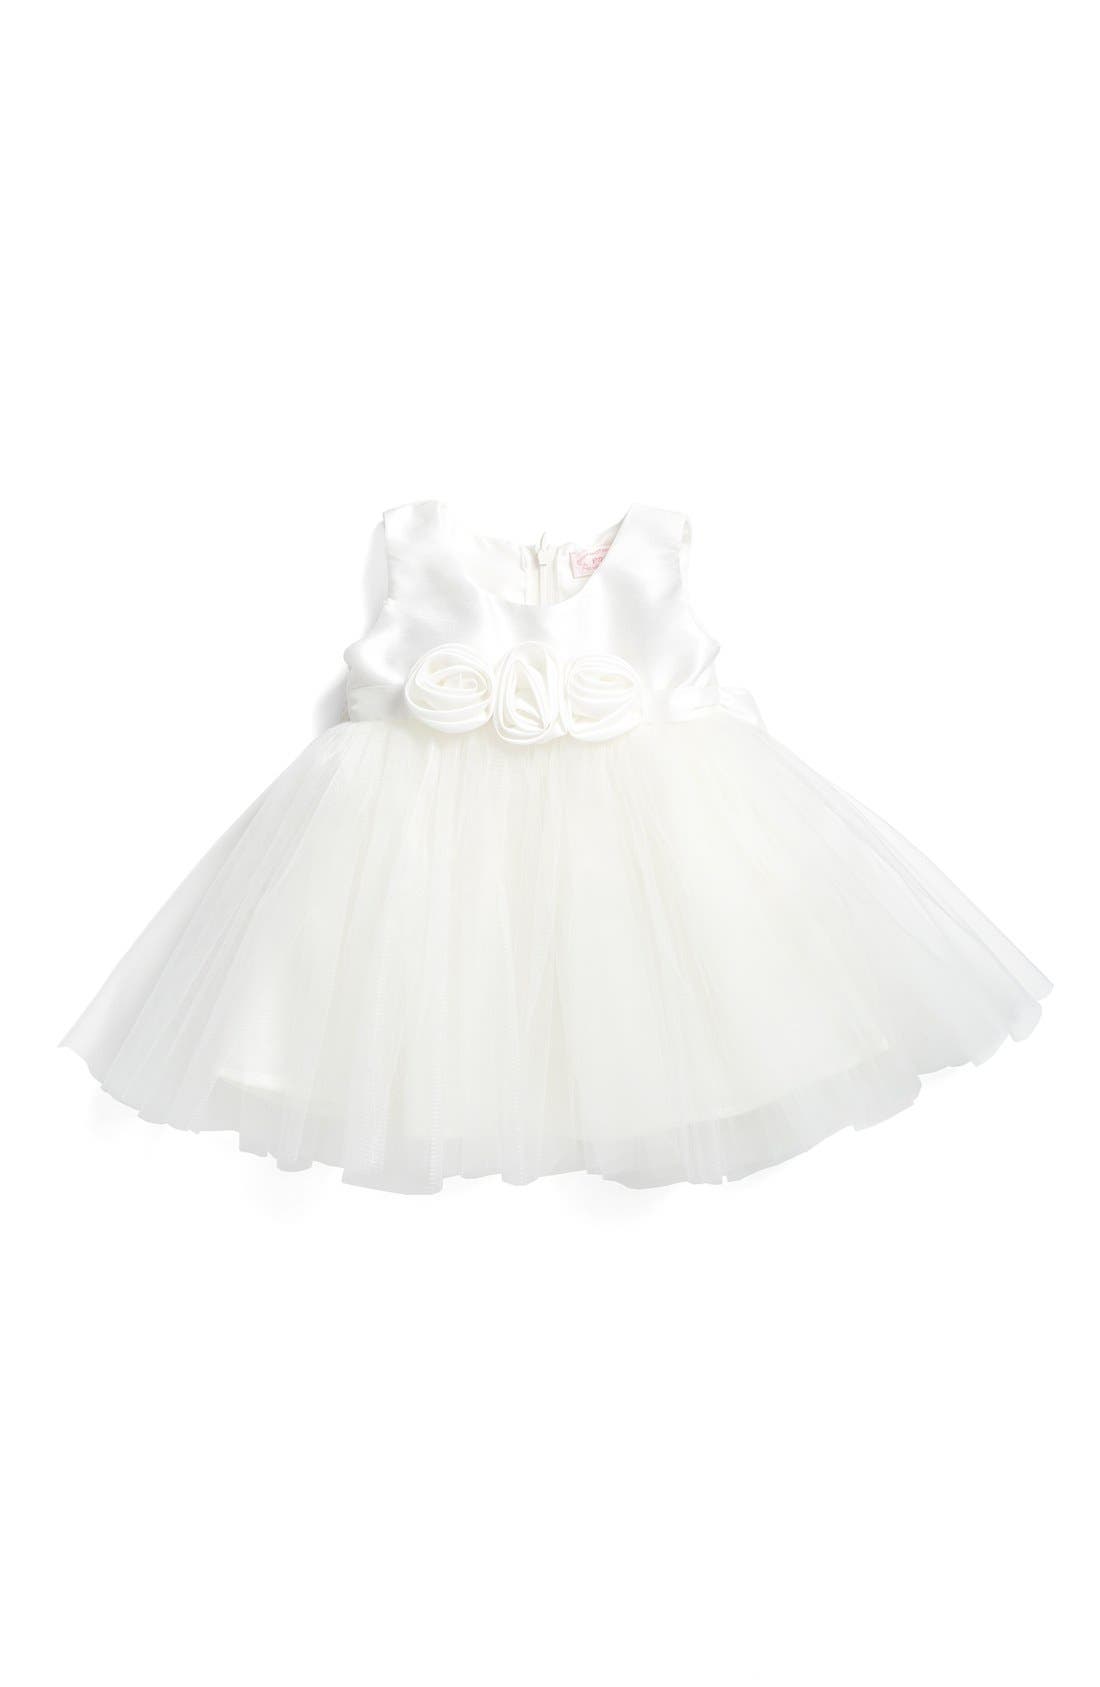 White Fancy Tulle Dress Customizable Toddlers Girls Infants